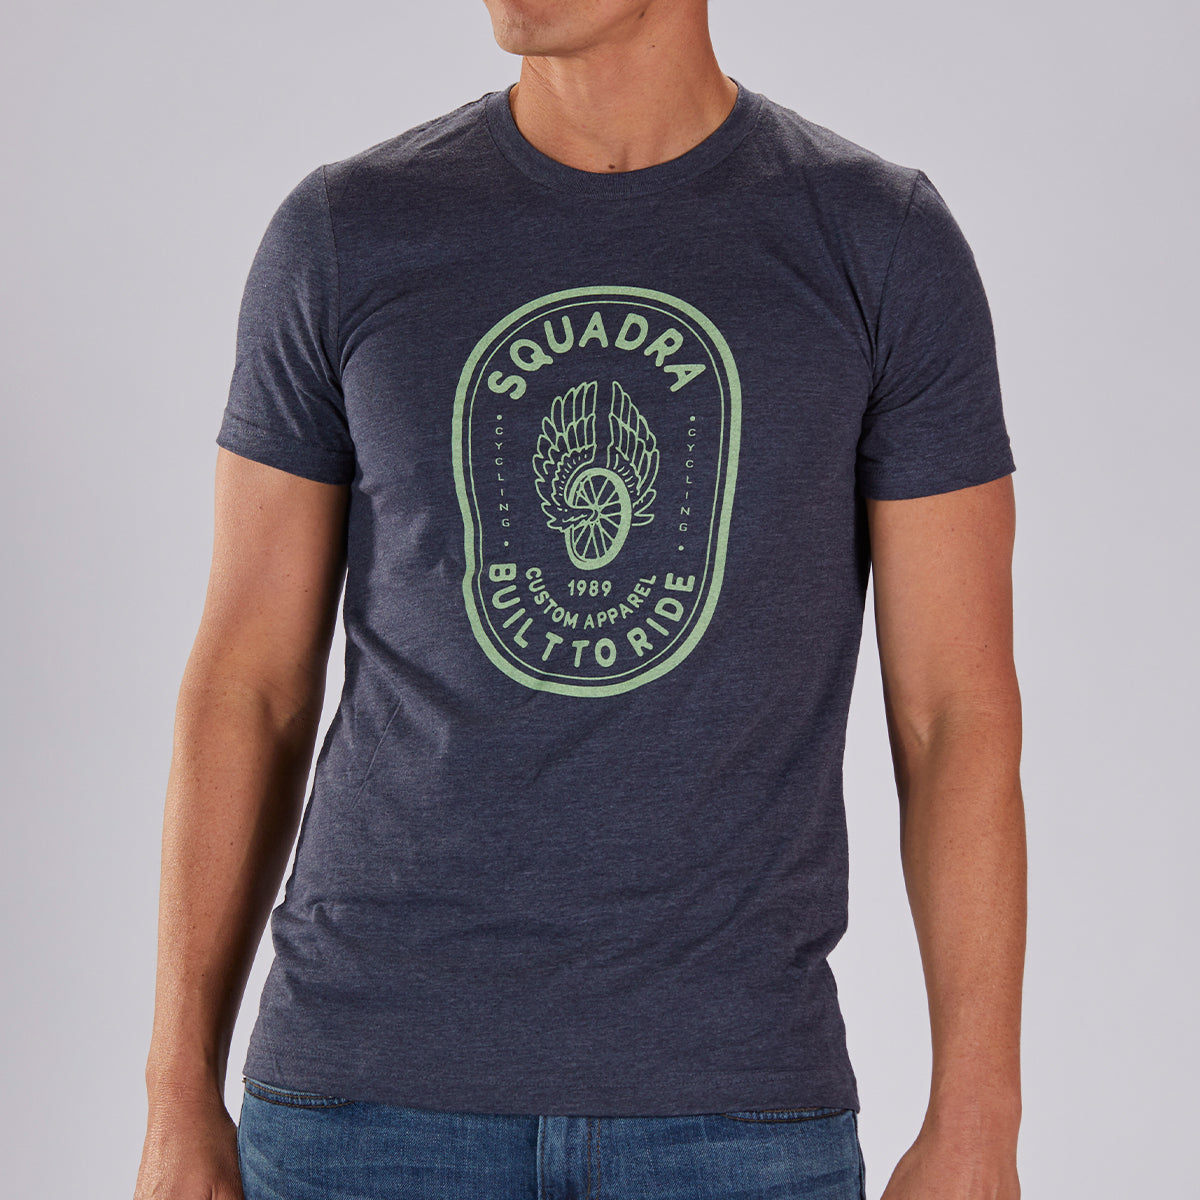 MENS LIMITED EDITION COTTON TEE - HEATHER NAVY "SQUADRA PATCH"